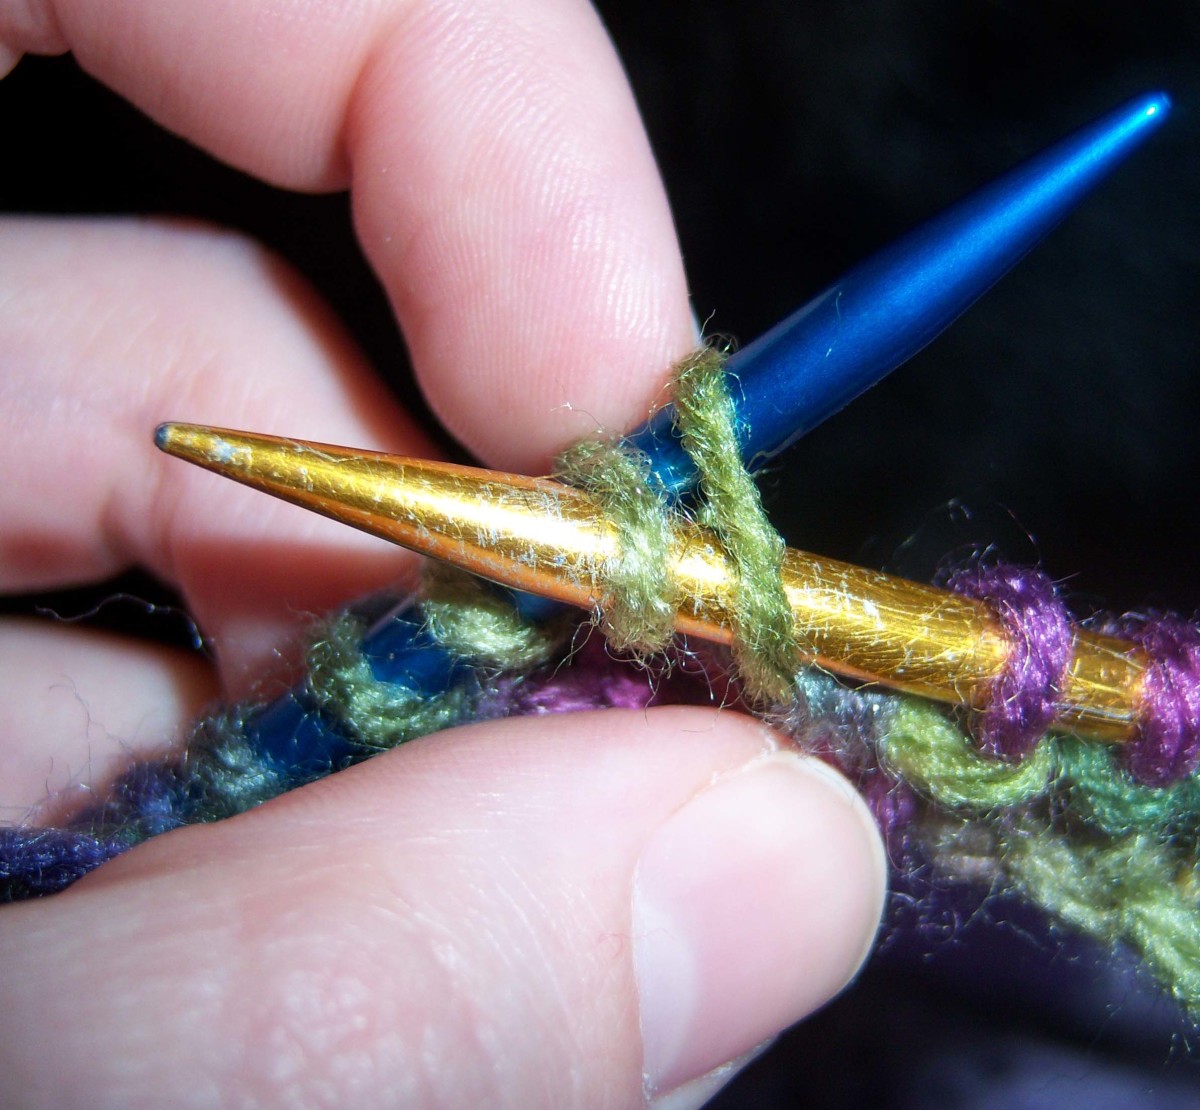 When purling two together, insert the gold needle through two stitches instead of one.